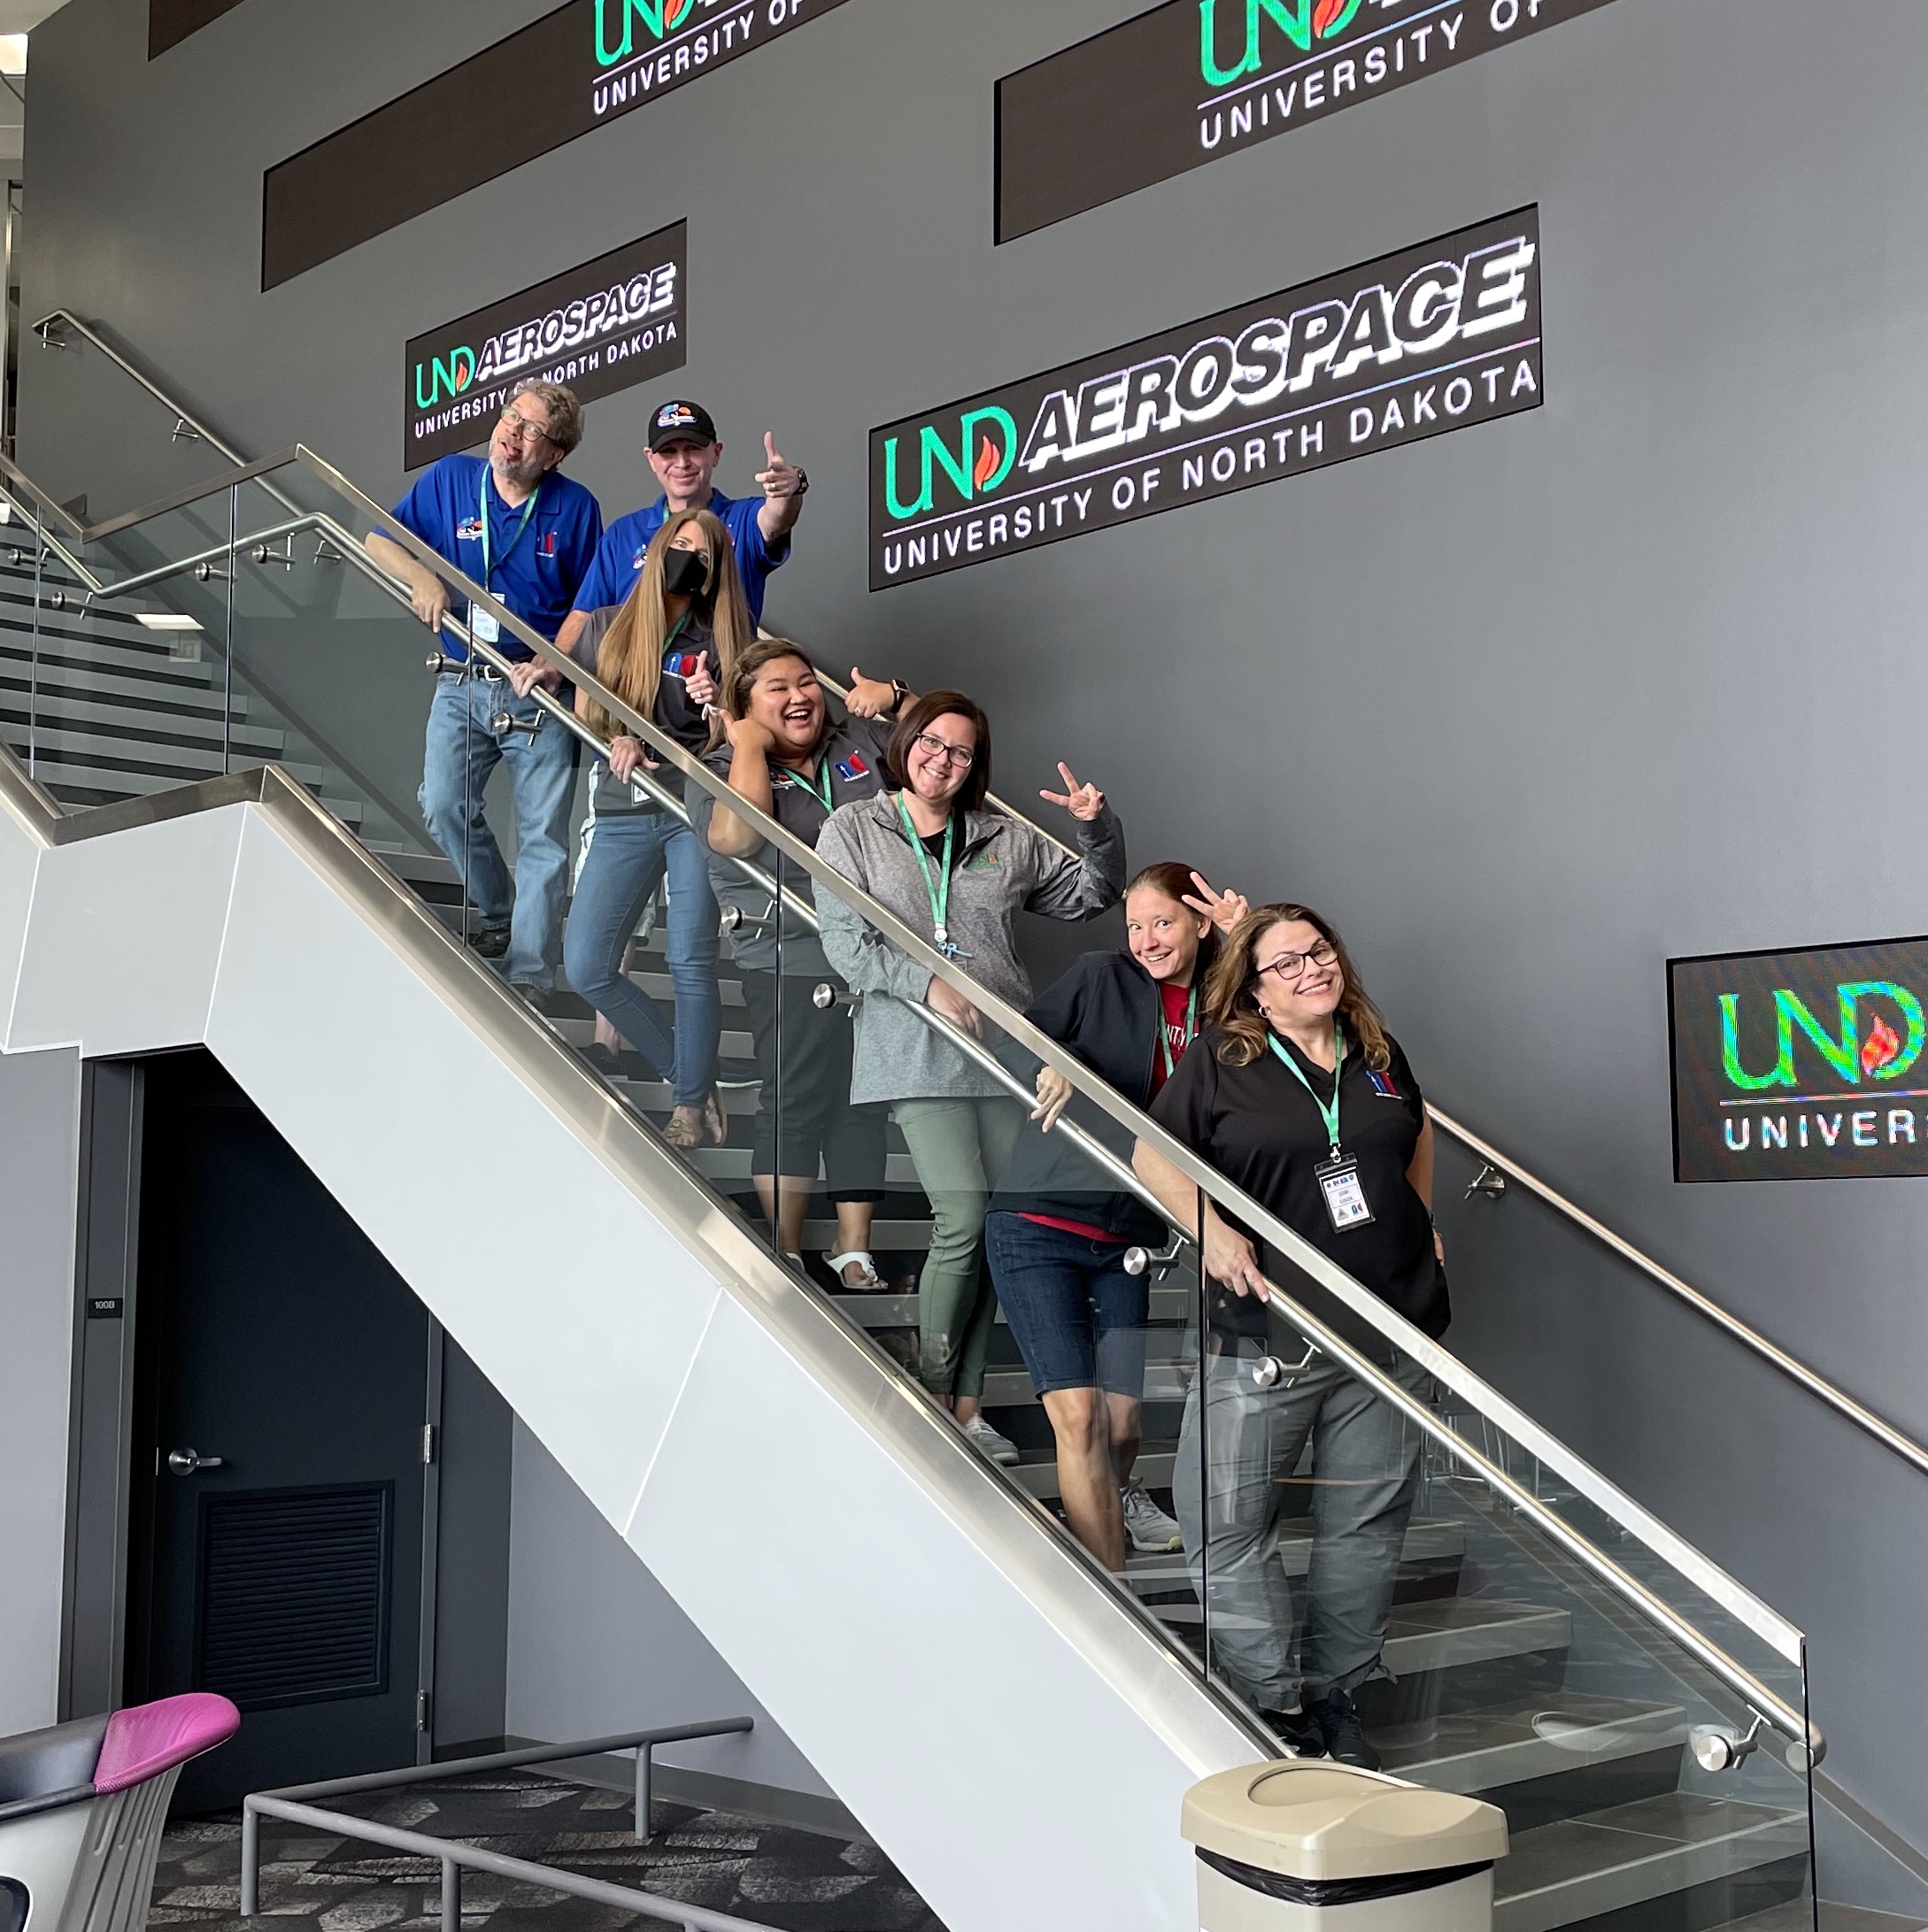 A group of people posing on a staircase. The sign behind them reads: UND aerospace, University of North Dakota